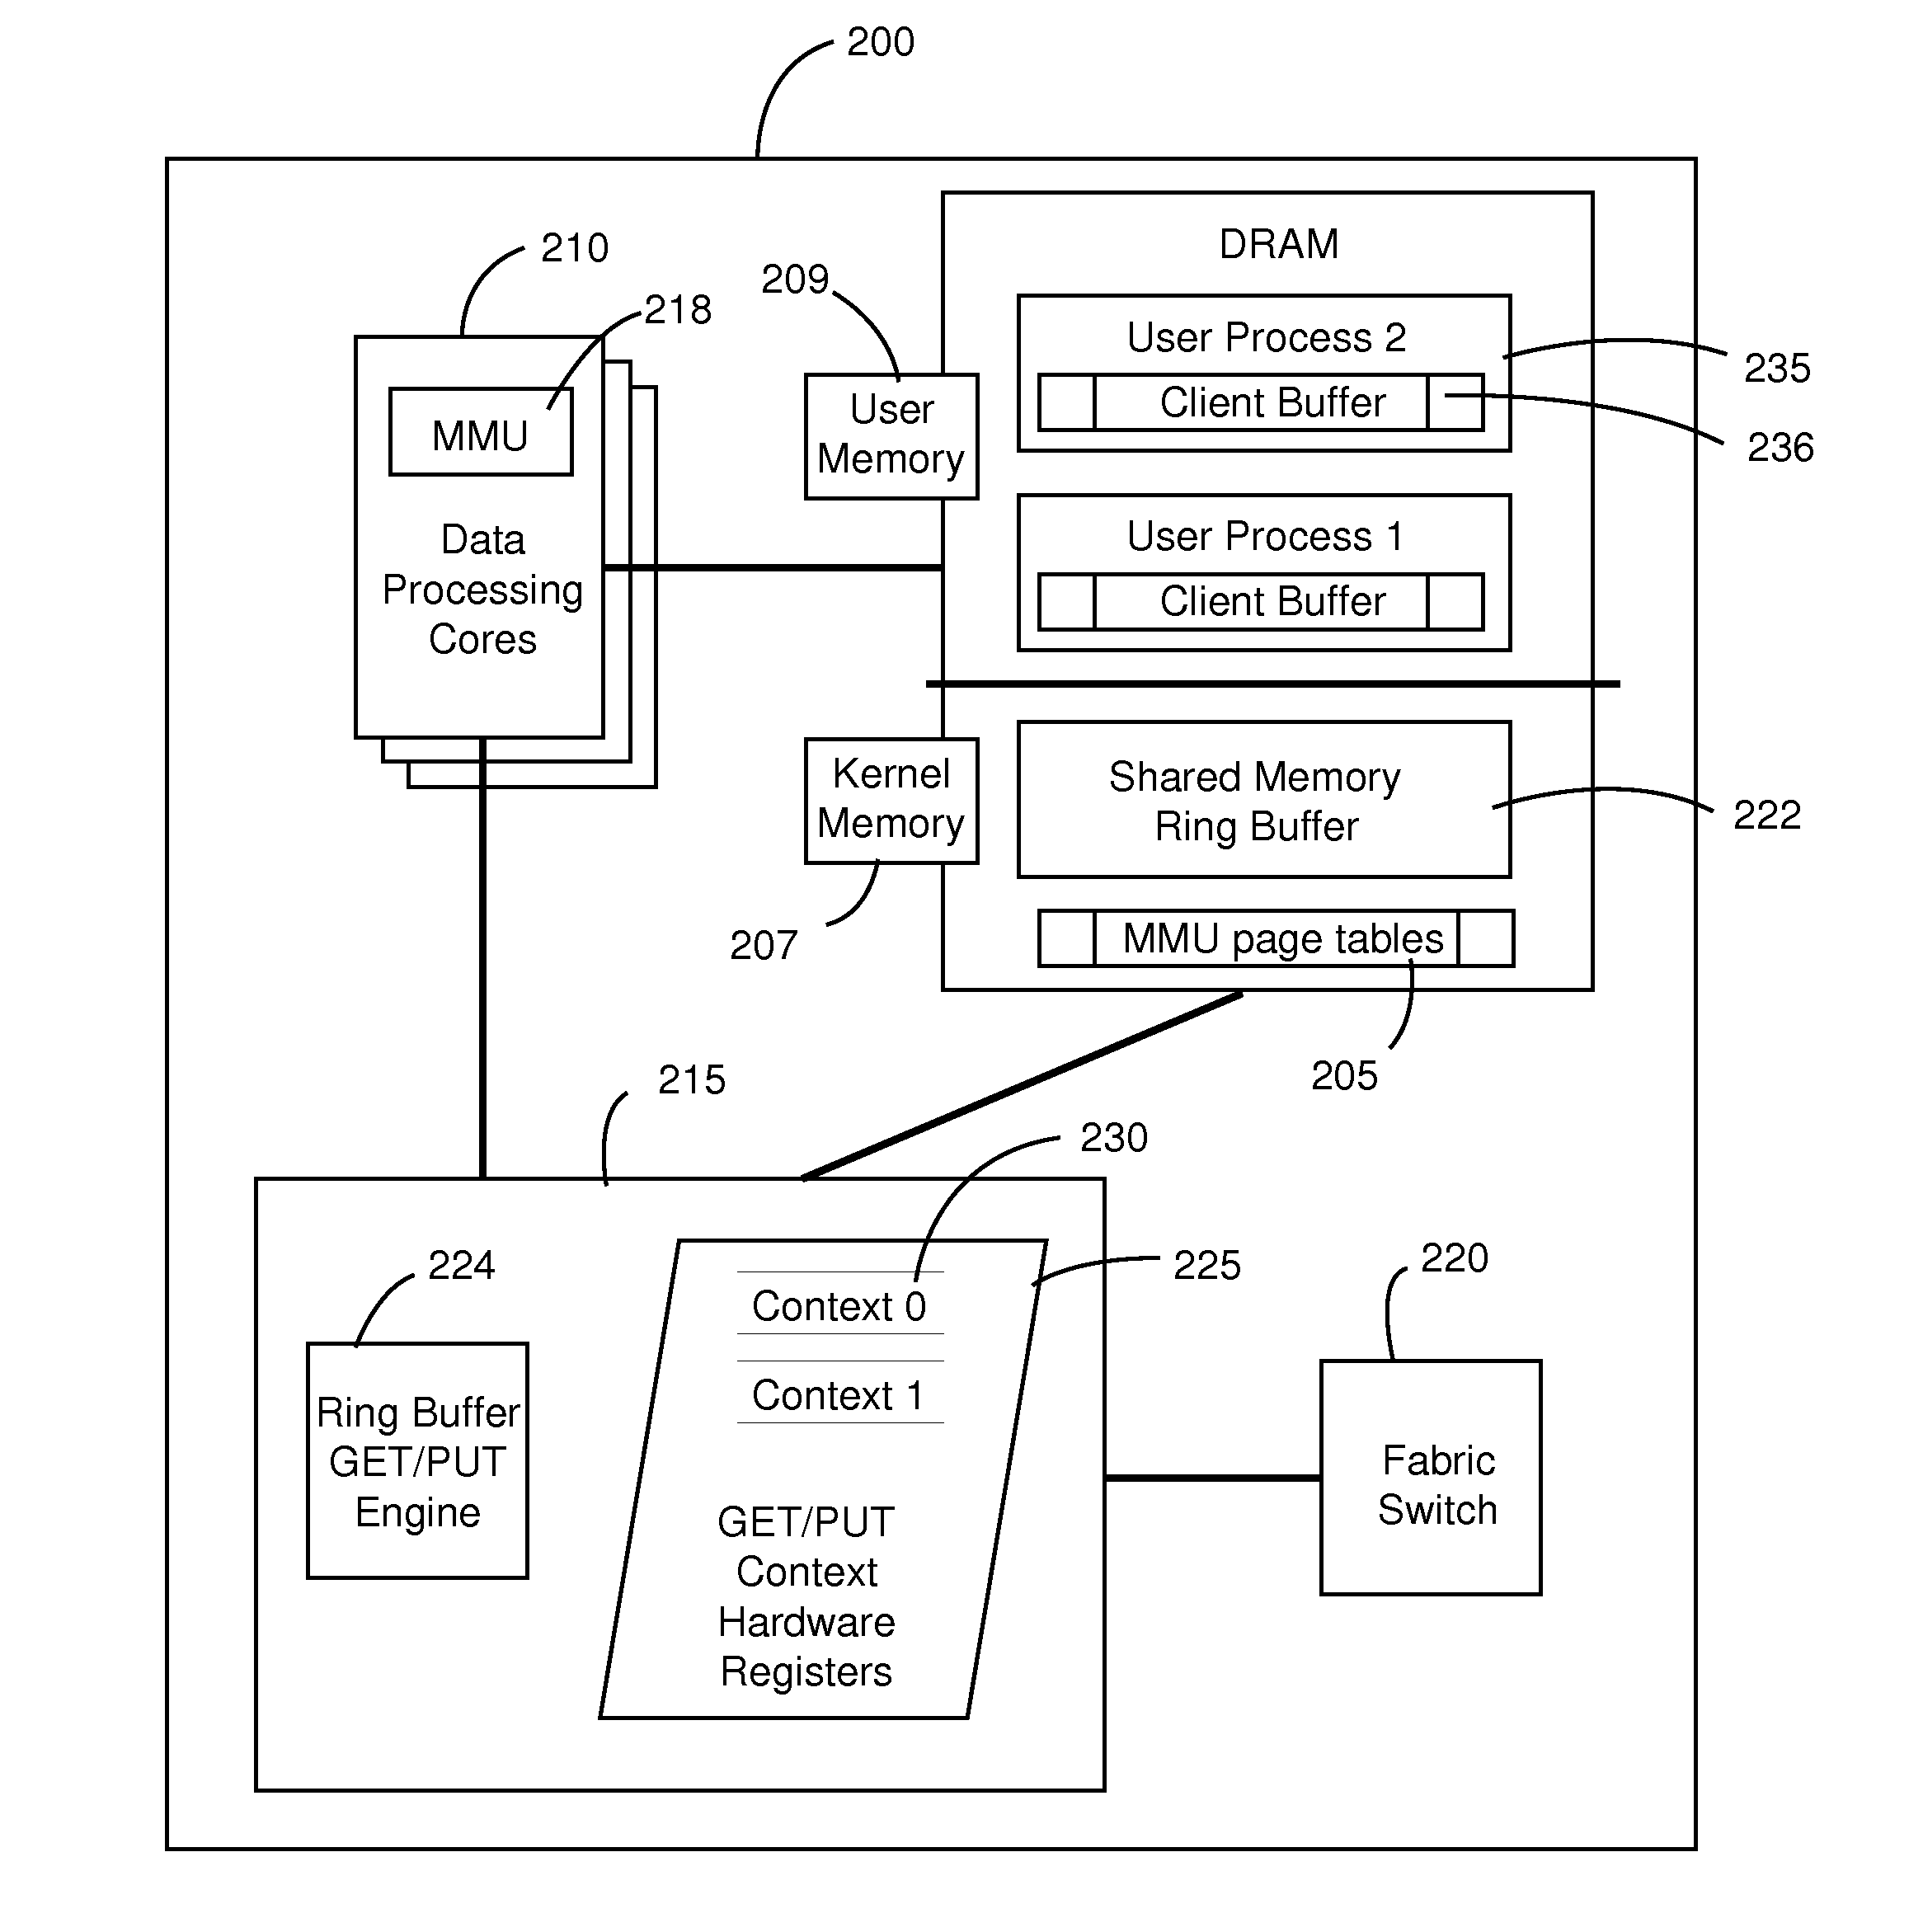 Remote memory ring buffers in a cluster of data processing nodes